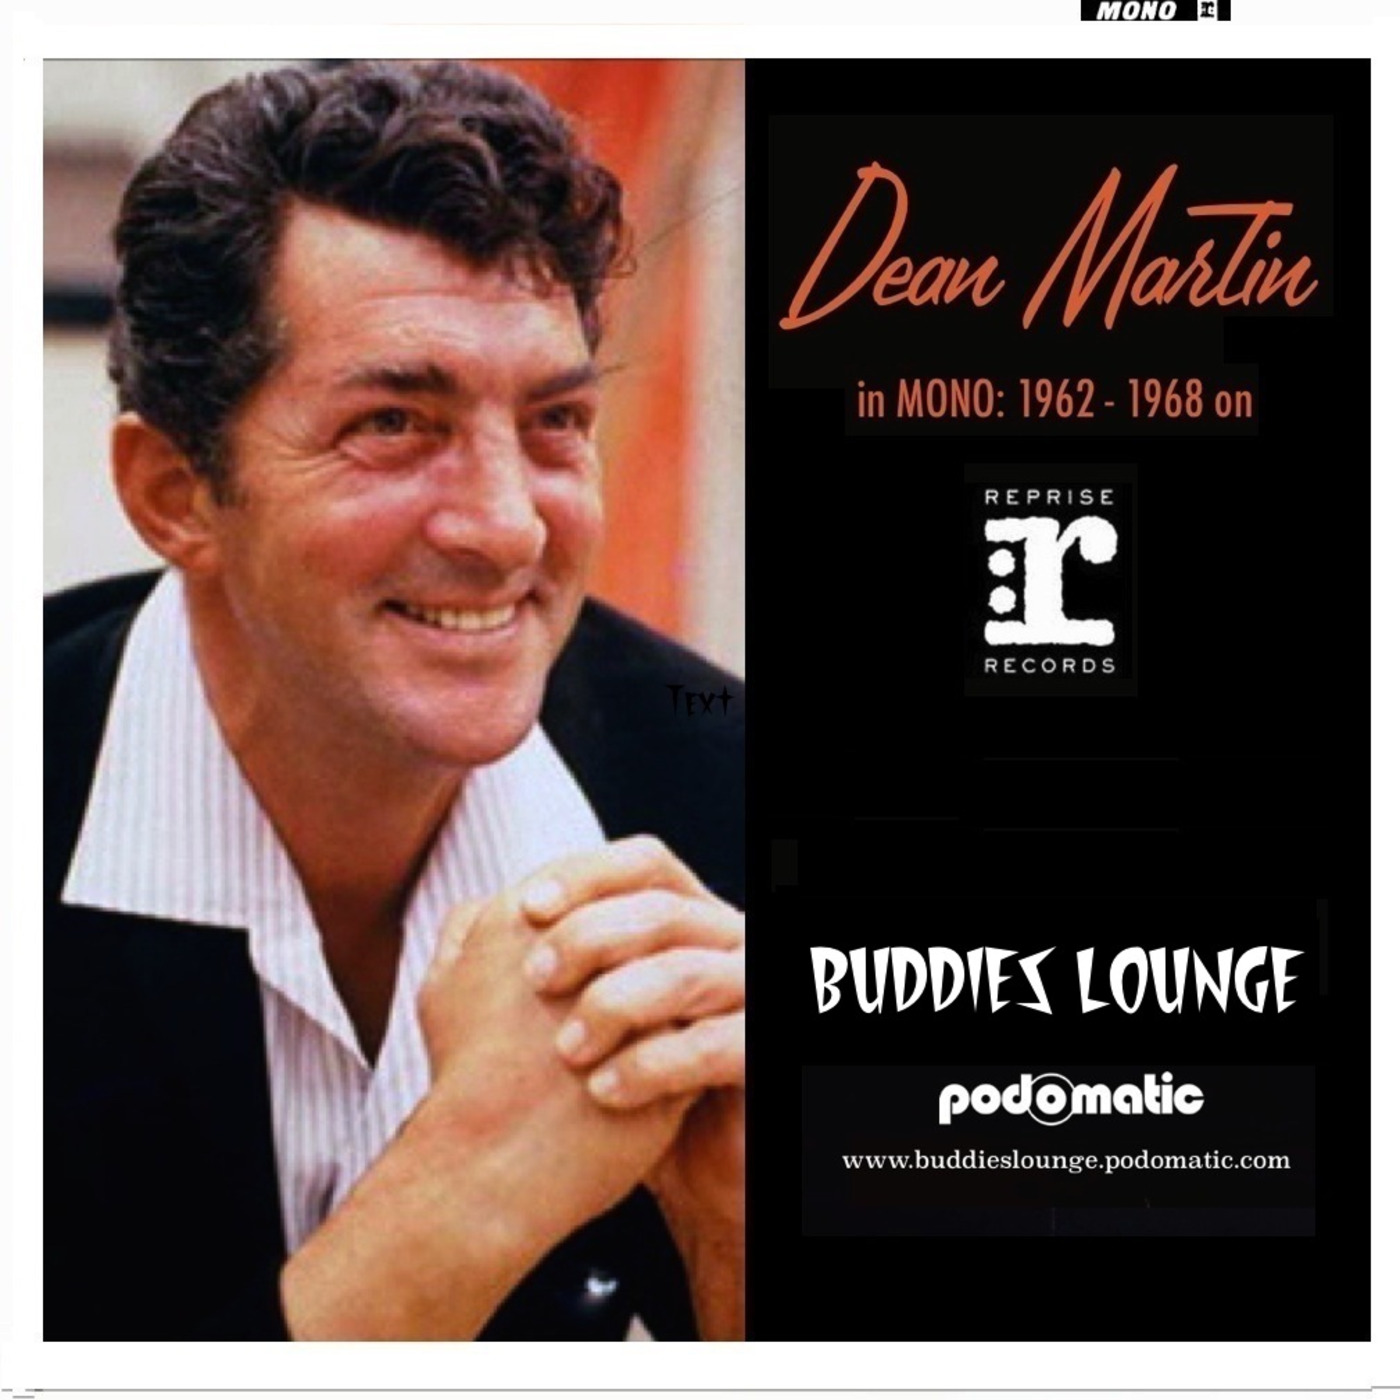 FROM THE VAULT - Buddies Lounge - Show 258 (Dean Martin in MONO on Reprise!)